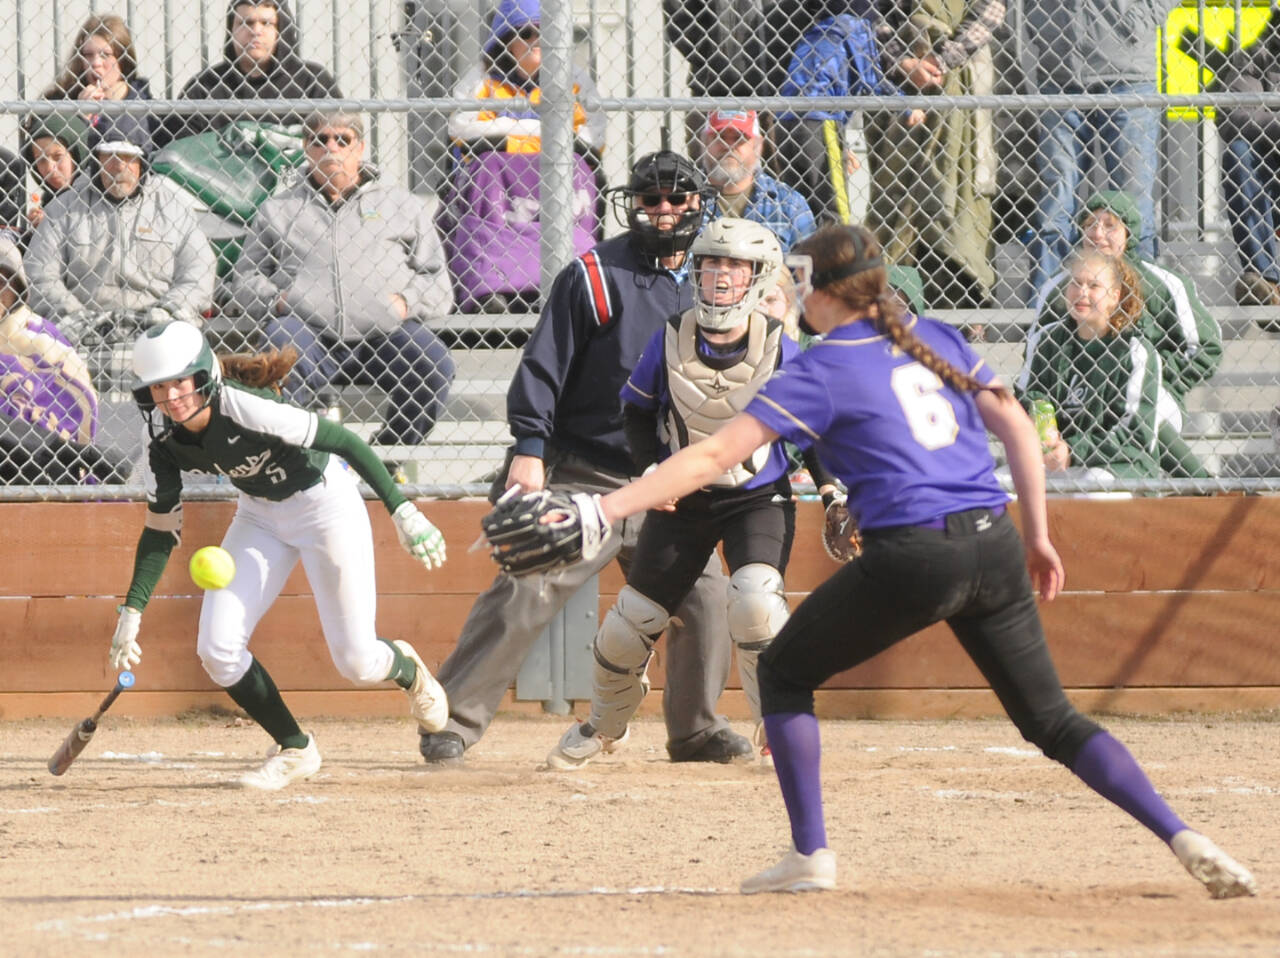 Port Angeles’ Zoe Smith hits the ball past Sequim pitcher Angel Wagner as Wolves’ catcher Christy Grubb is also in on the play. (Michael Dashiell/Olympic Peninsula News Group)